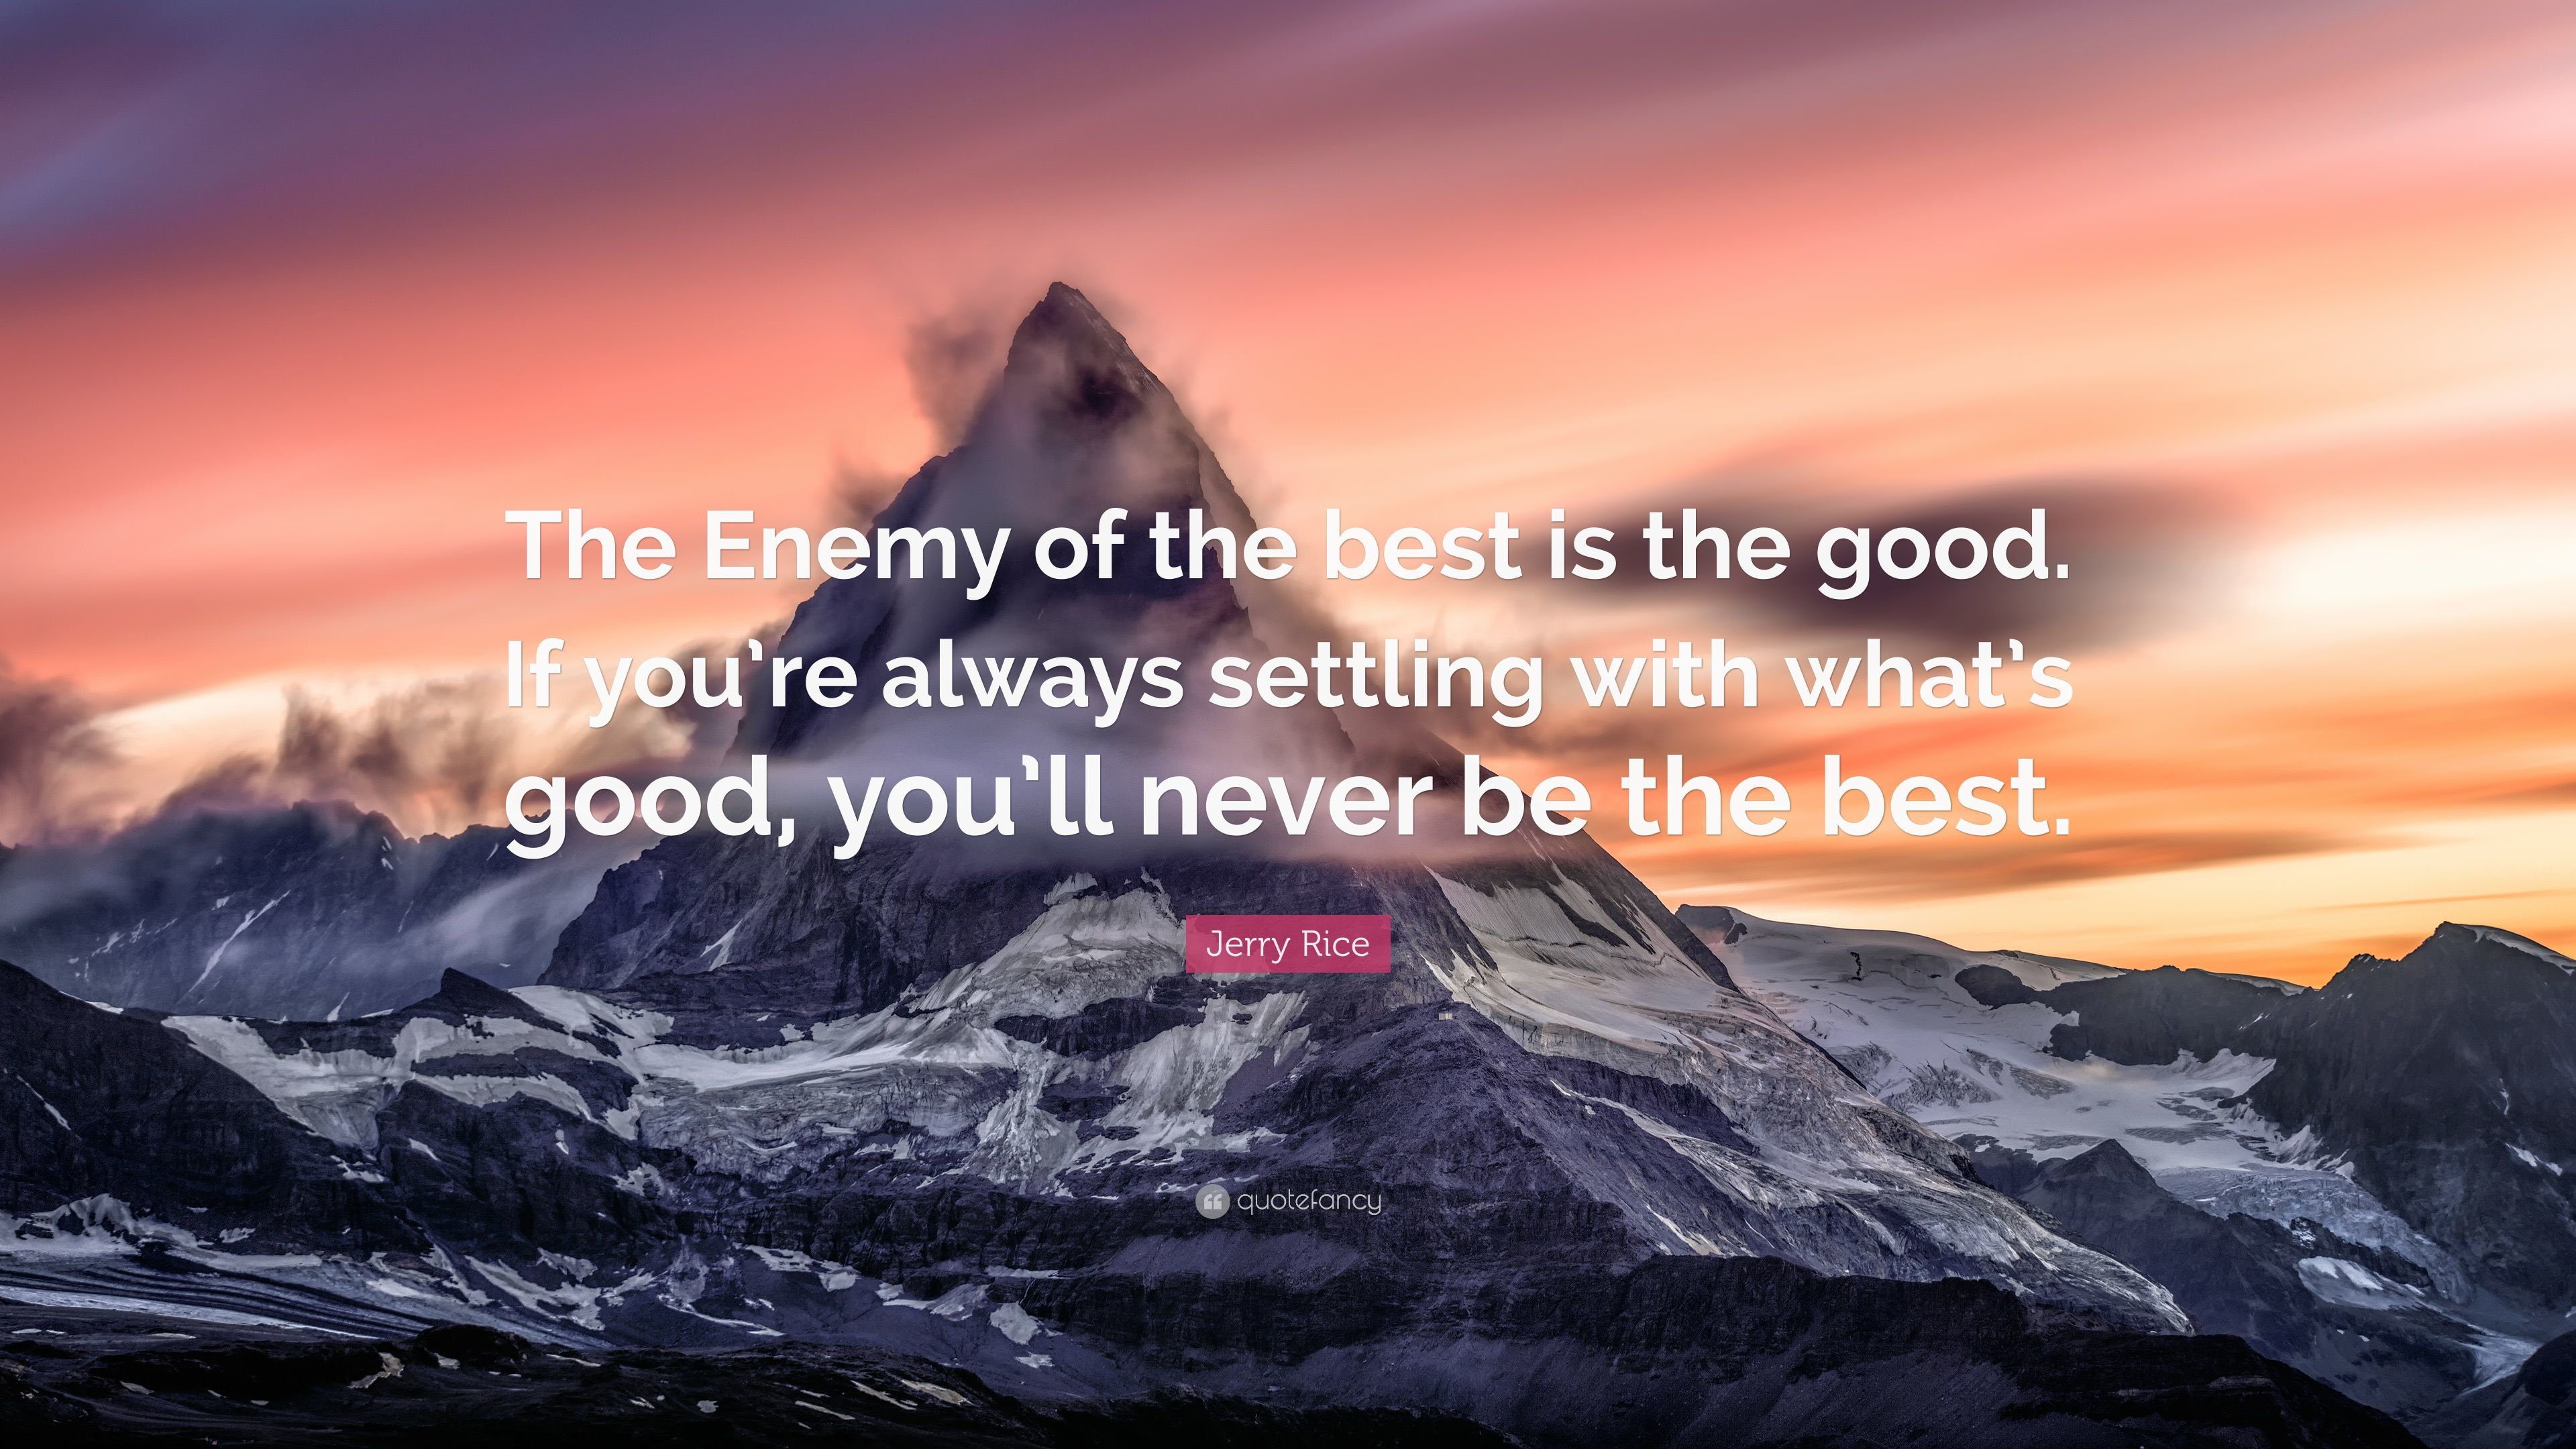 3840x2160 Jerry Rice Quote: “The Enemy of the best is the good. If you